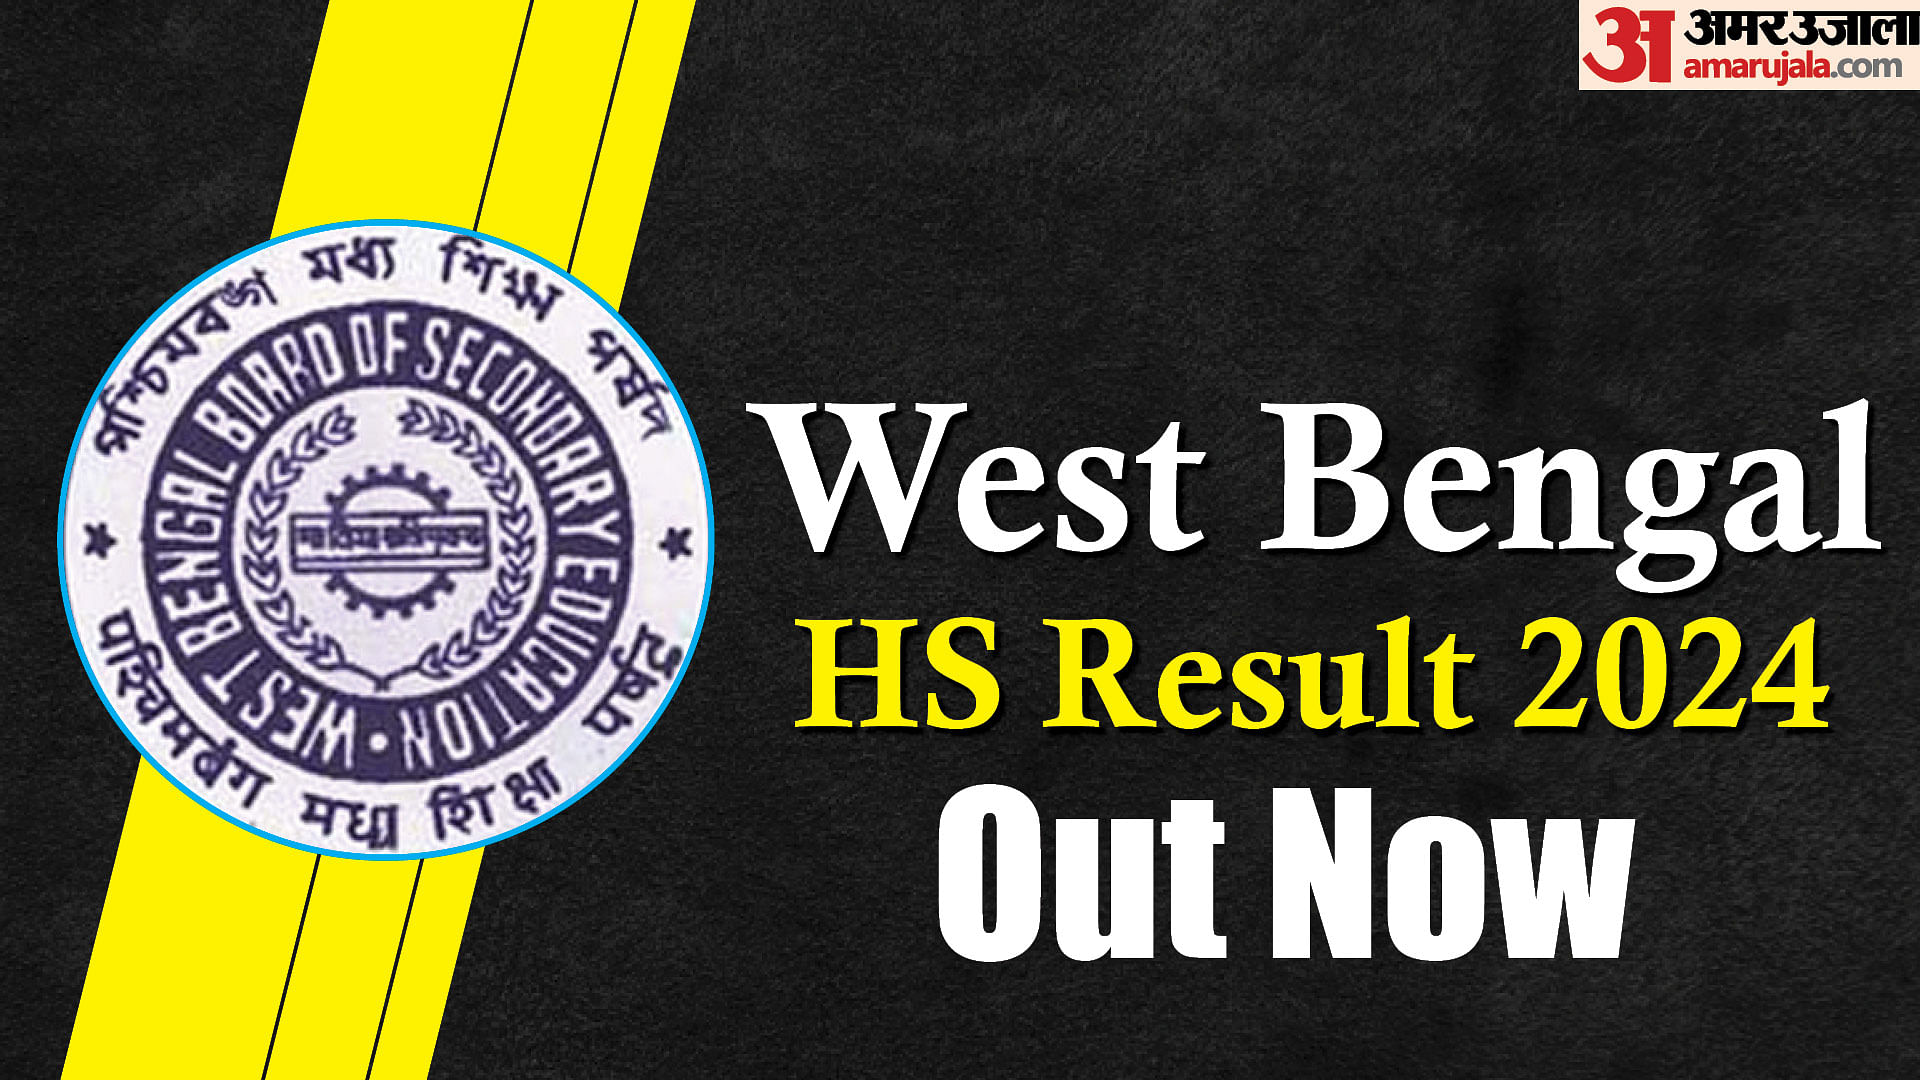 West Bengal HS Result 2024 out now, Overall pass percentage stood at 90%, Read the result analysis here